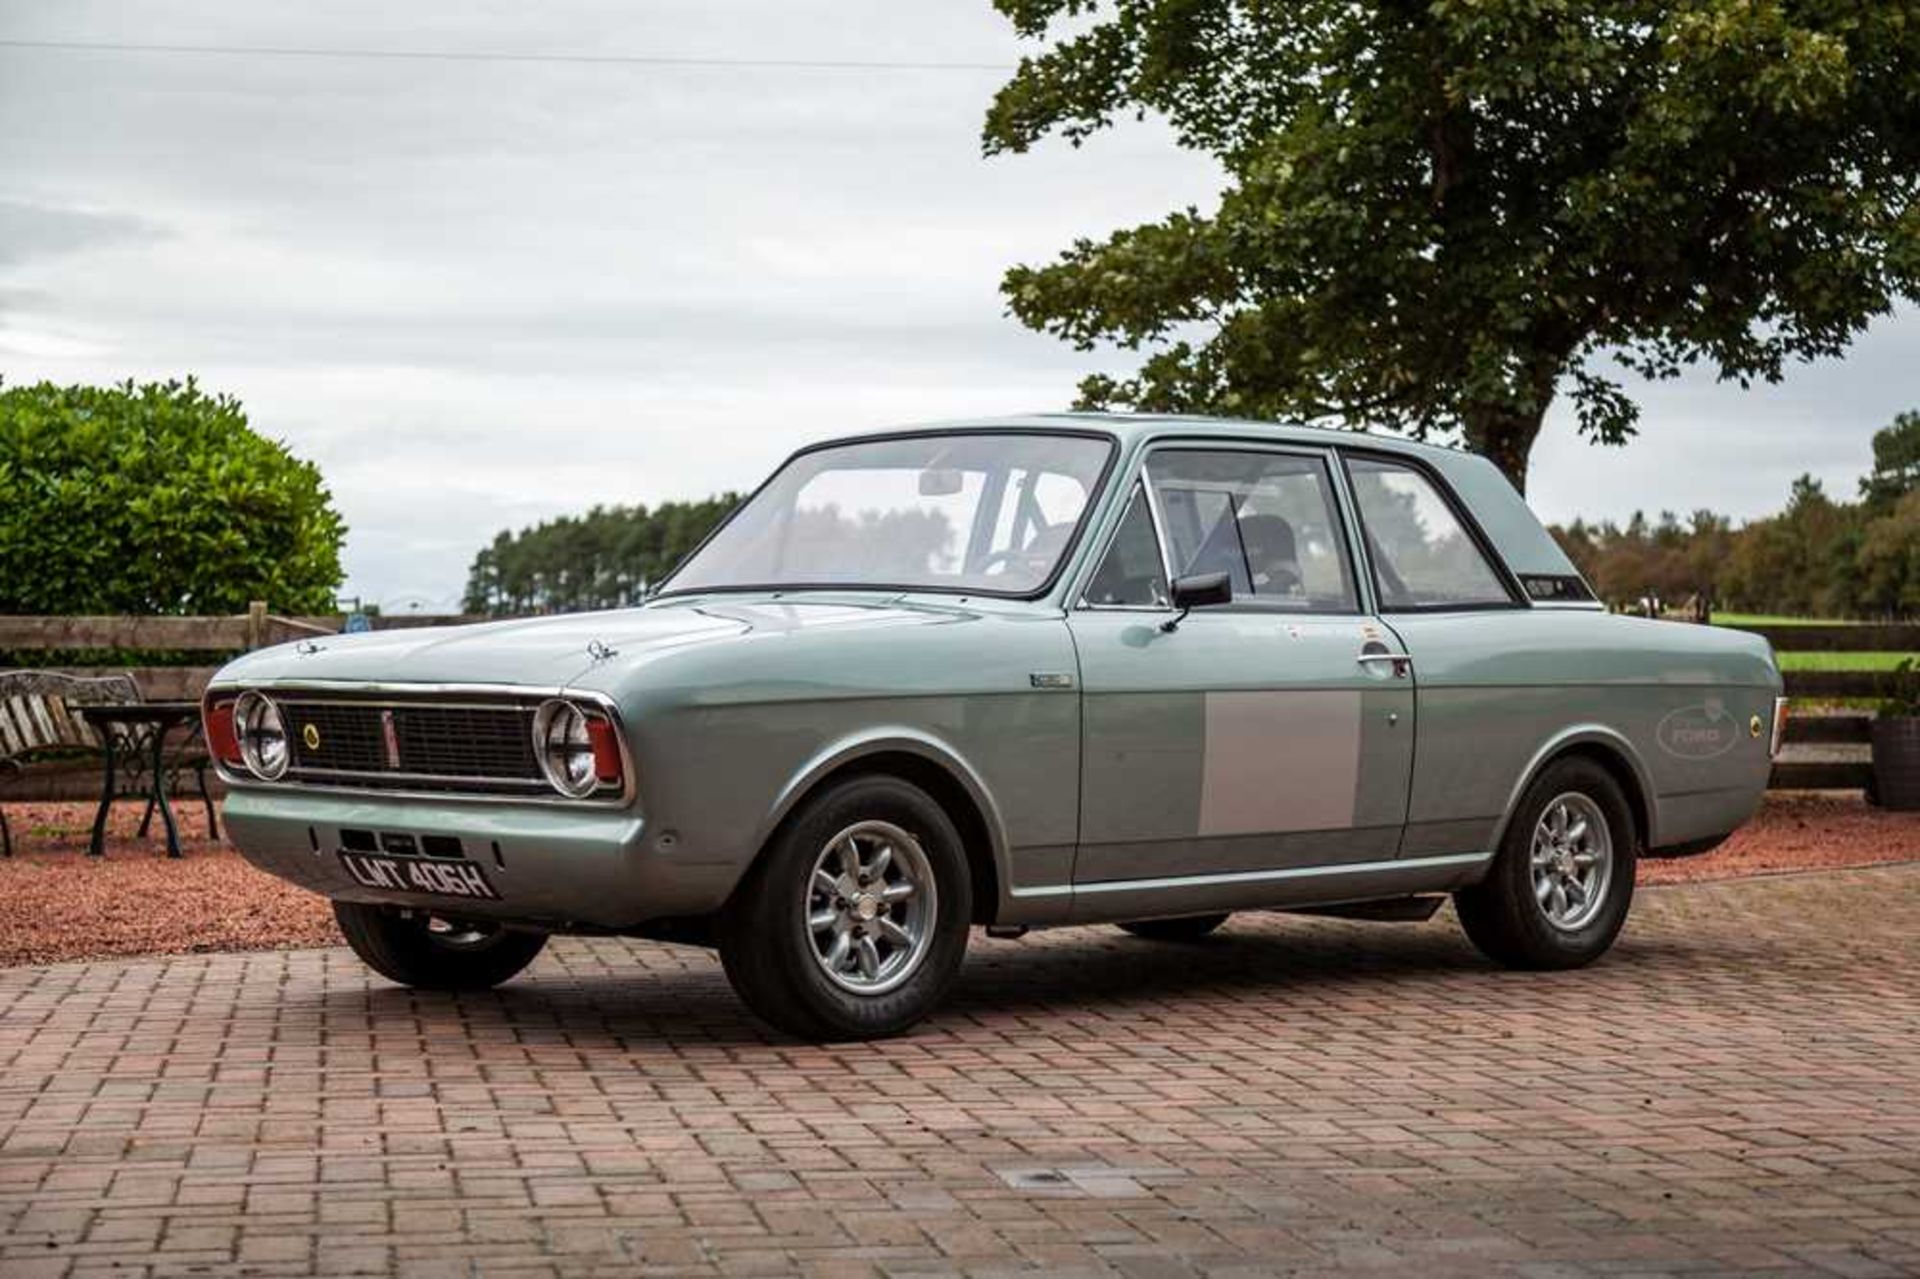 1969 Ford Cortina 'Lotus' Competition Saloon Powered by a 1598cc FIA-legal Lotus Twin-Cam with Twin